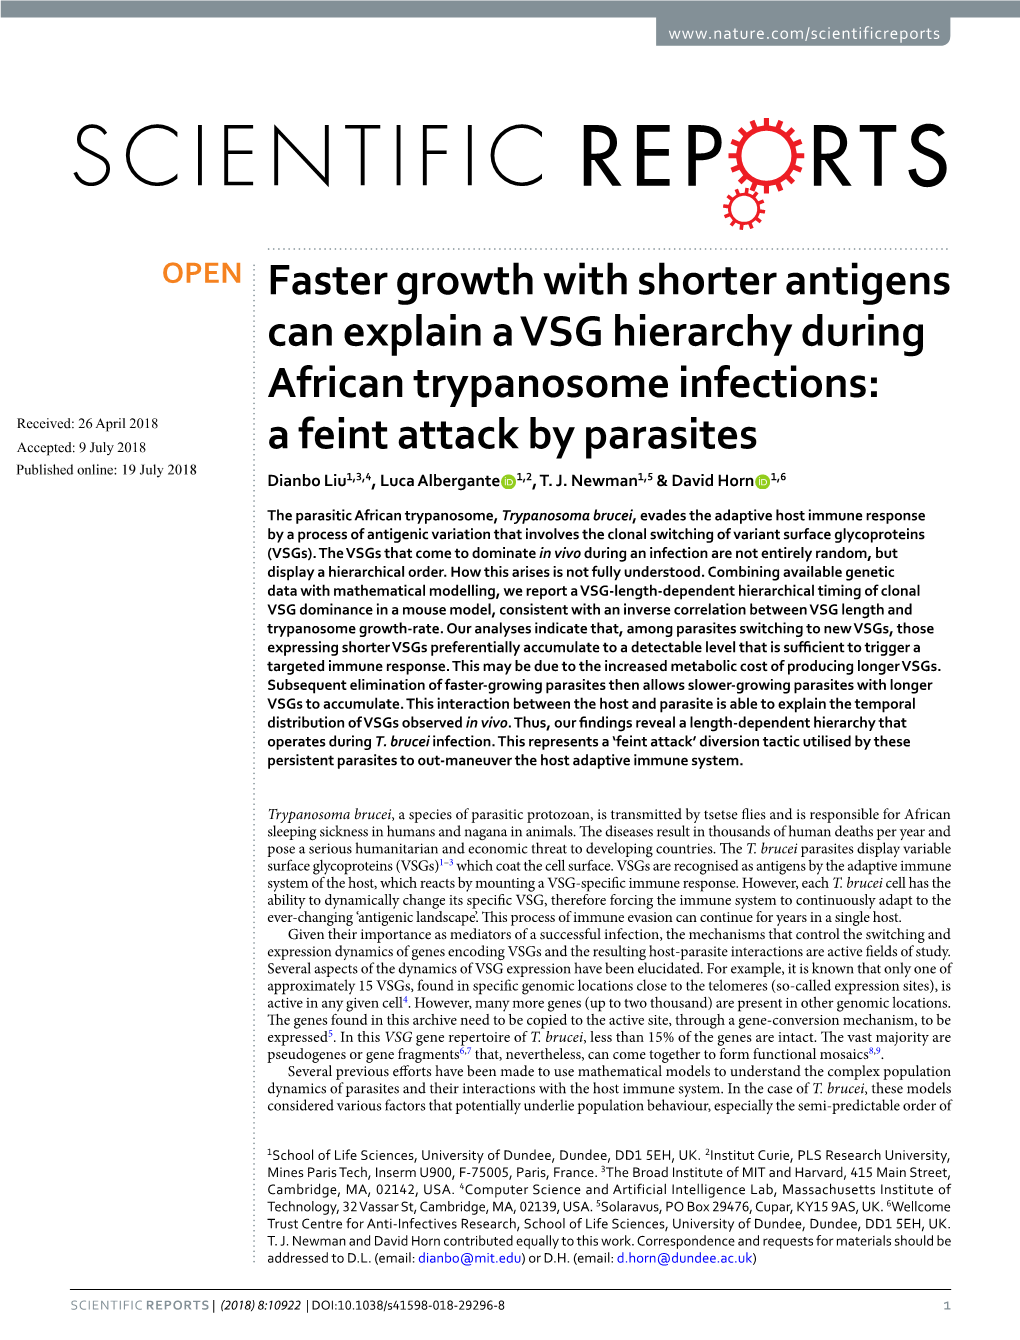 Faster Growth with Shorter Antigens Can Explain a VSG Hierarchy During African Trypanosome Infections